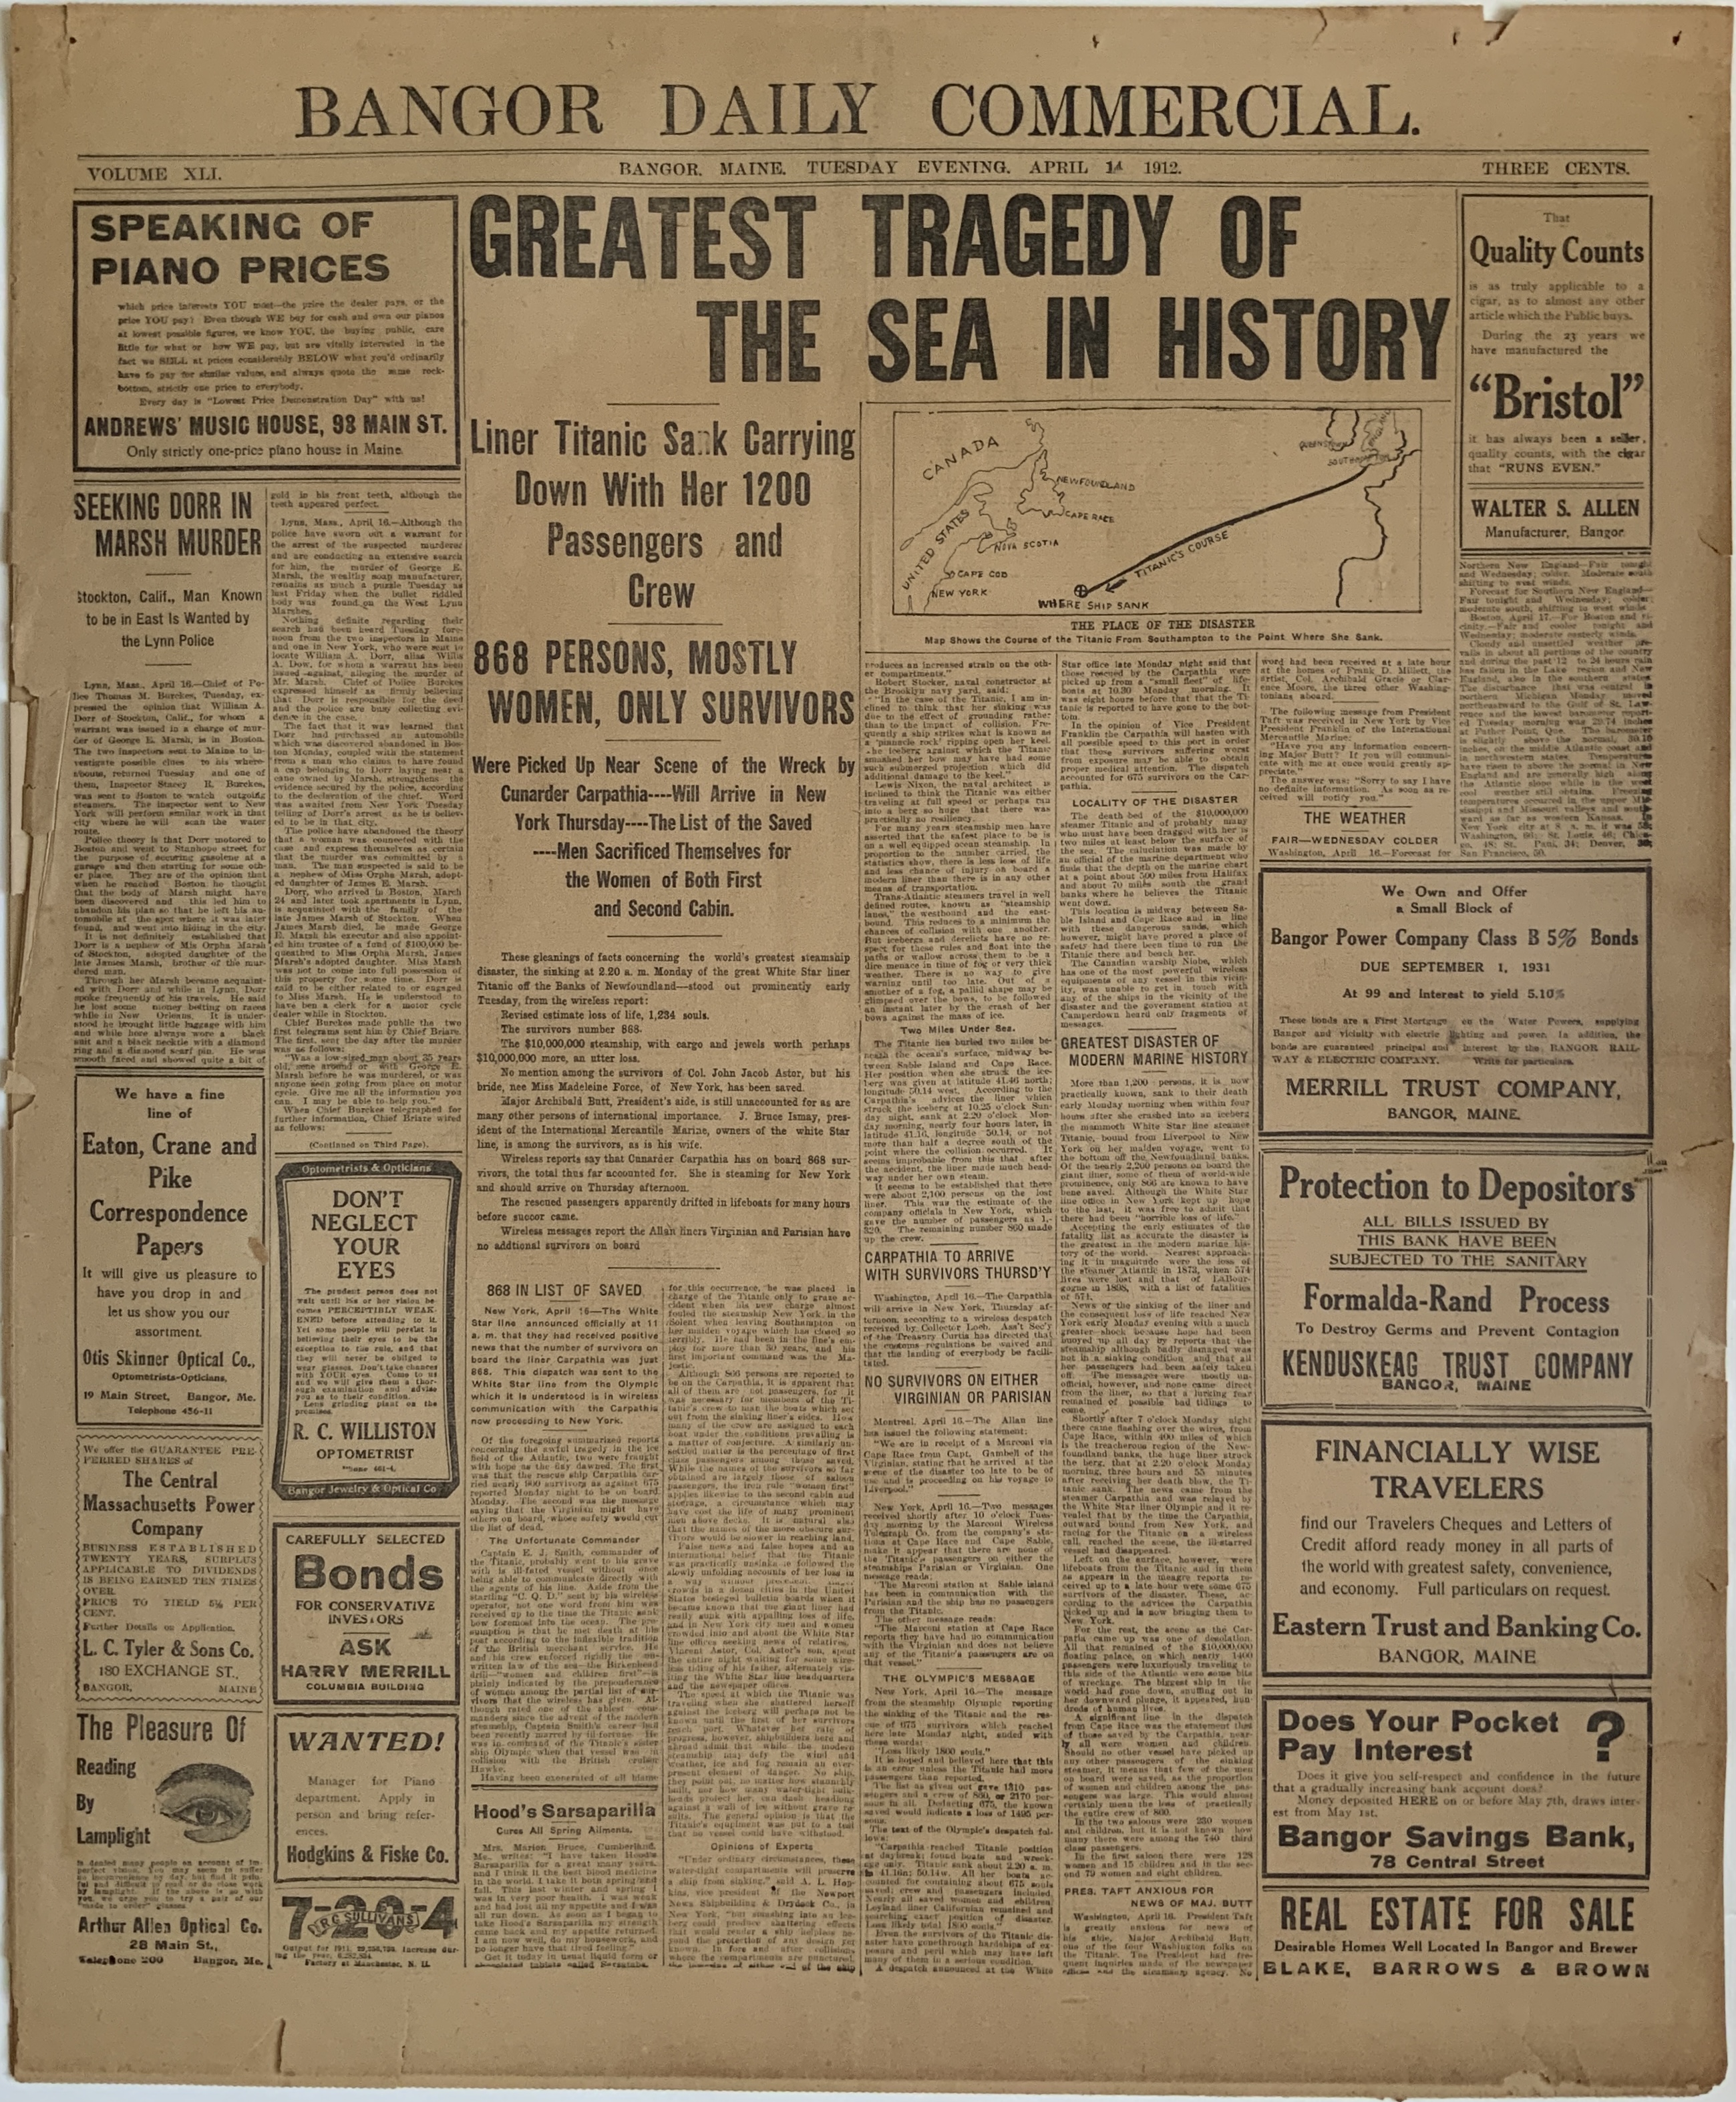 M38	TITANIC NEWS FRONT - BANGOR DAILY COMMERCIAL APRIL 14, 1912 “GREATEST TRAGEDY OF THE SEA IN HISTORY”